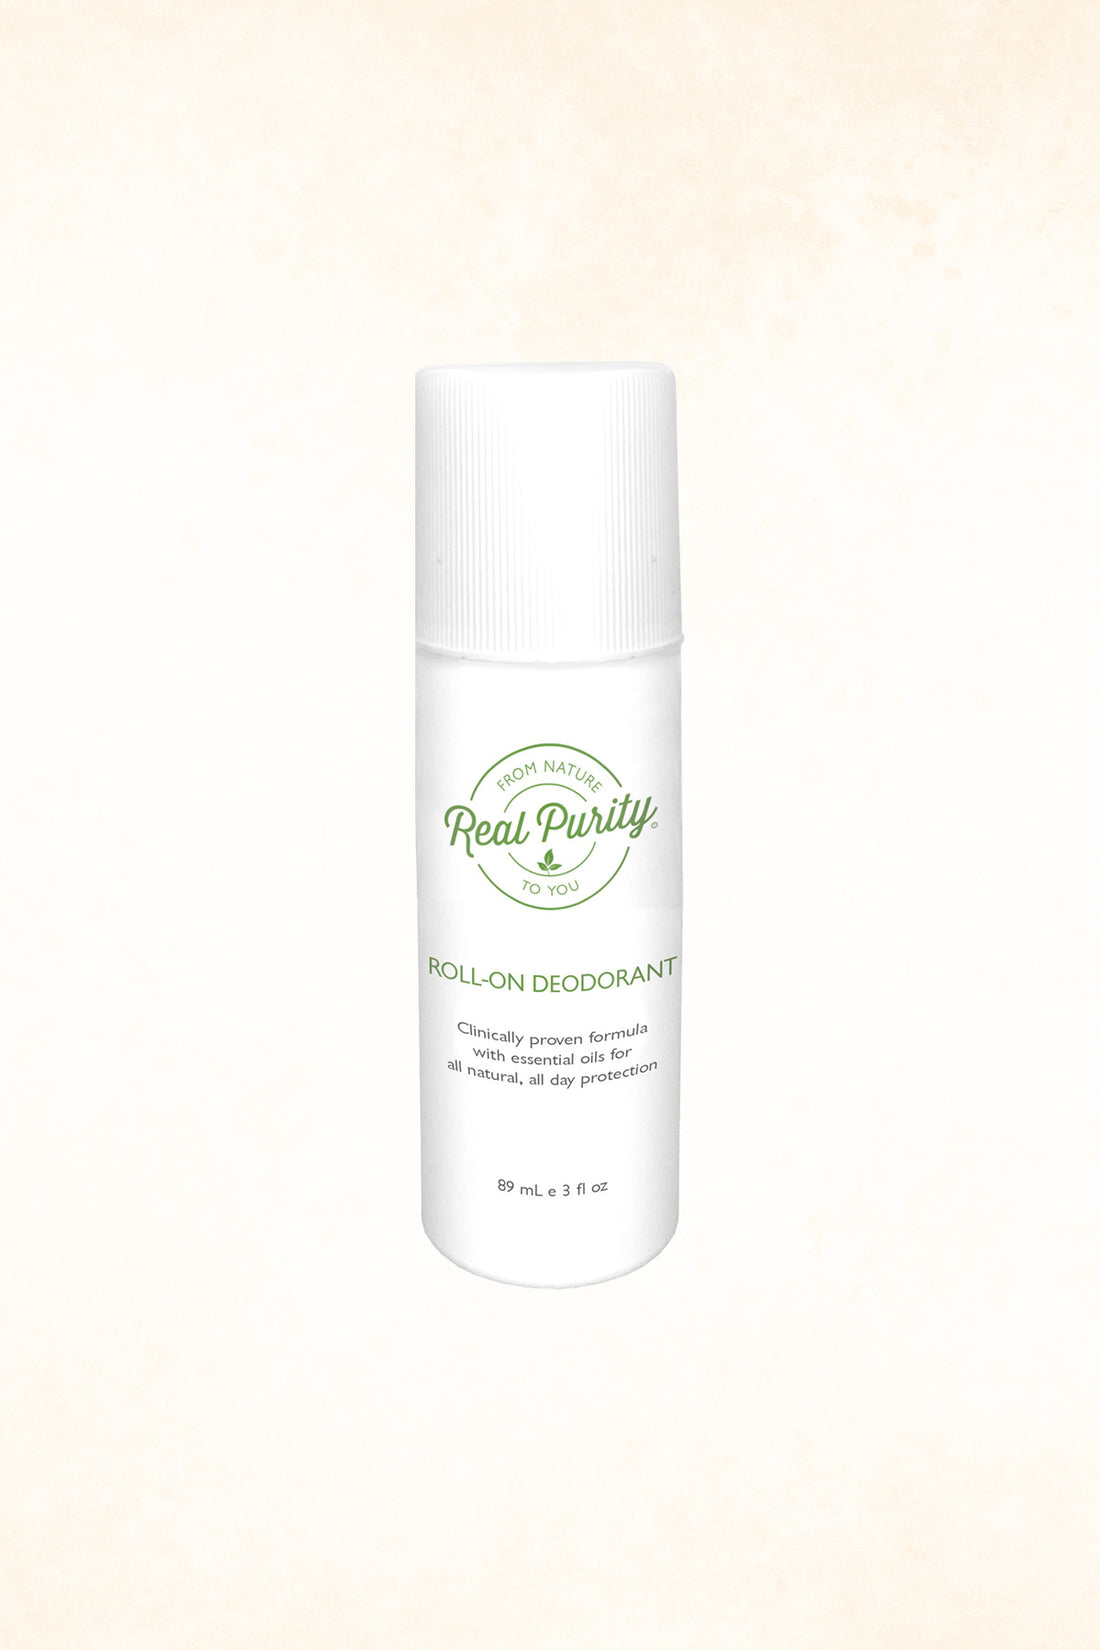 Real Purity – Roll-On Deodorant